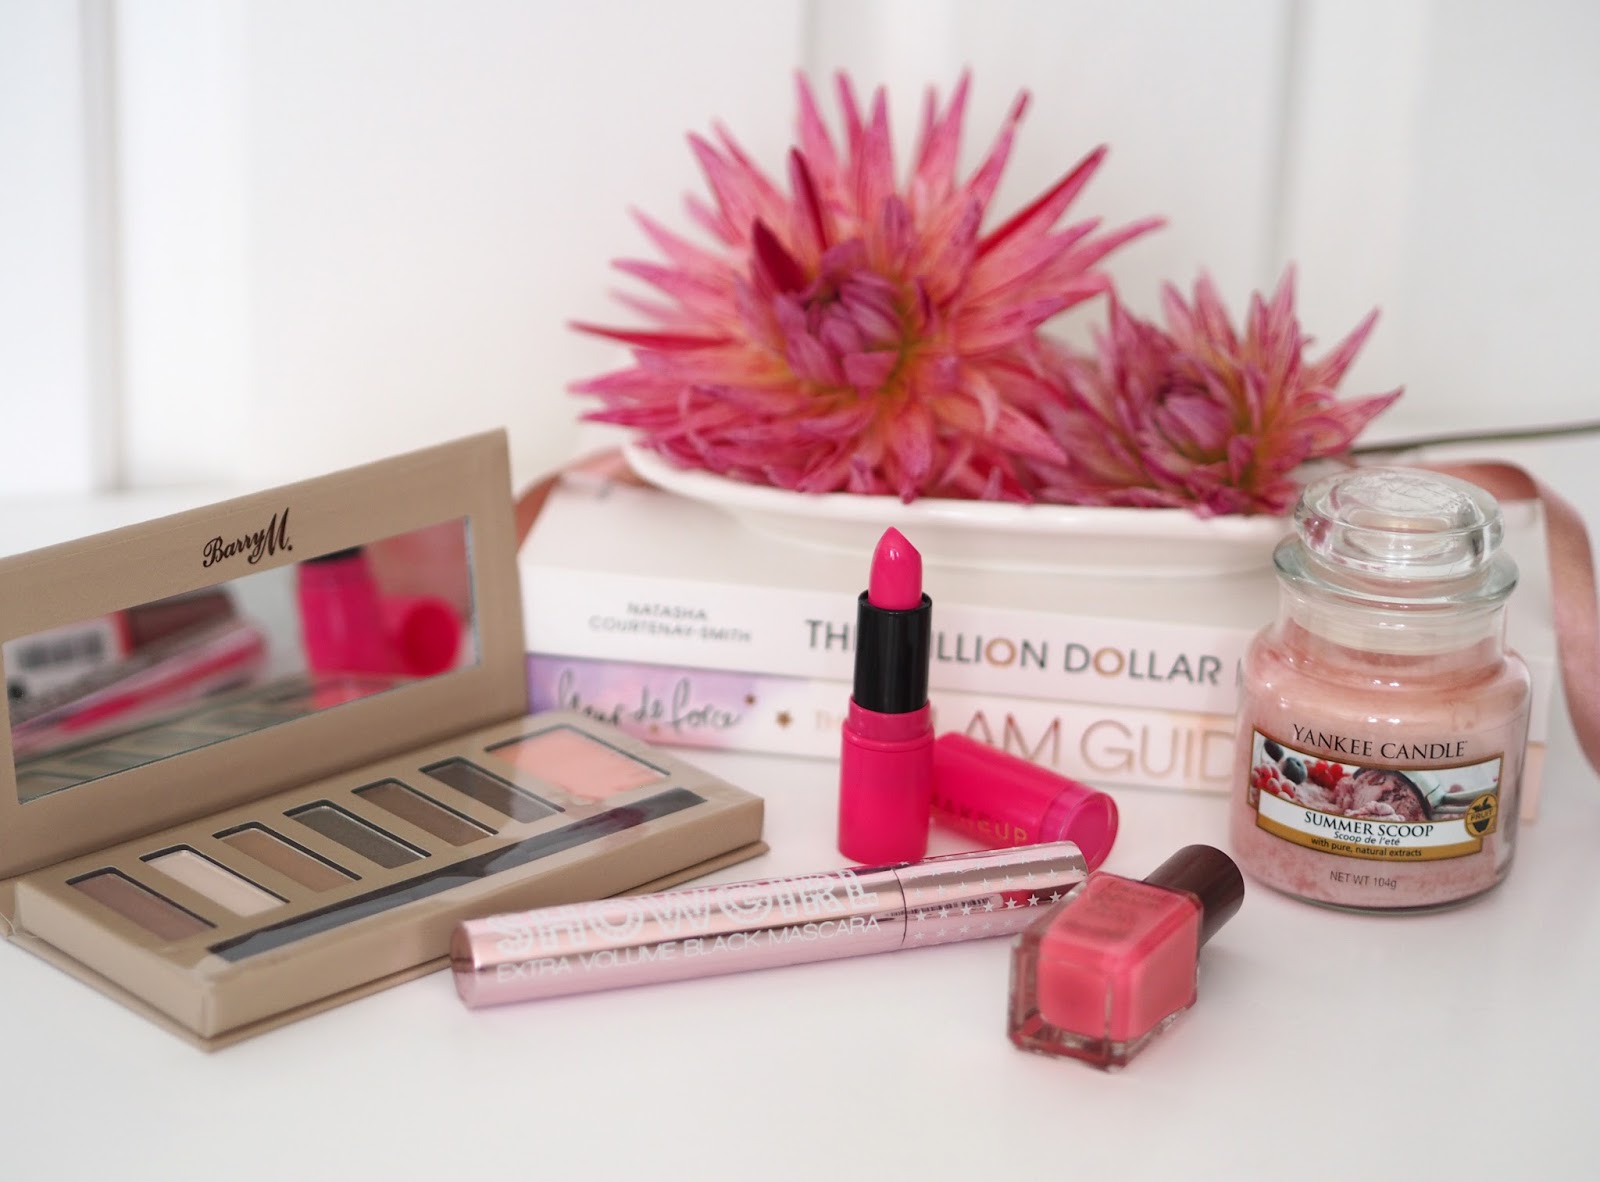 Celebrating 2 Years of Blogging, Katie Kirk Loves, Oasis Royal Worcester Playsuit, Blogger Anniversary, UK Blogger, Fashion Blogger, Style Blogger, Giveaway, Prize, Competition, Win This, Oasis Fashion, Blog Giveaway, Pink Make Up, Beauty Blogger, Pink Giveaway, Yankee Candle